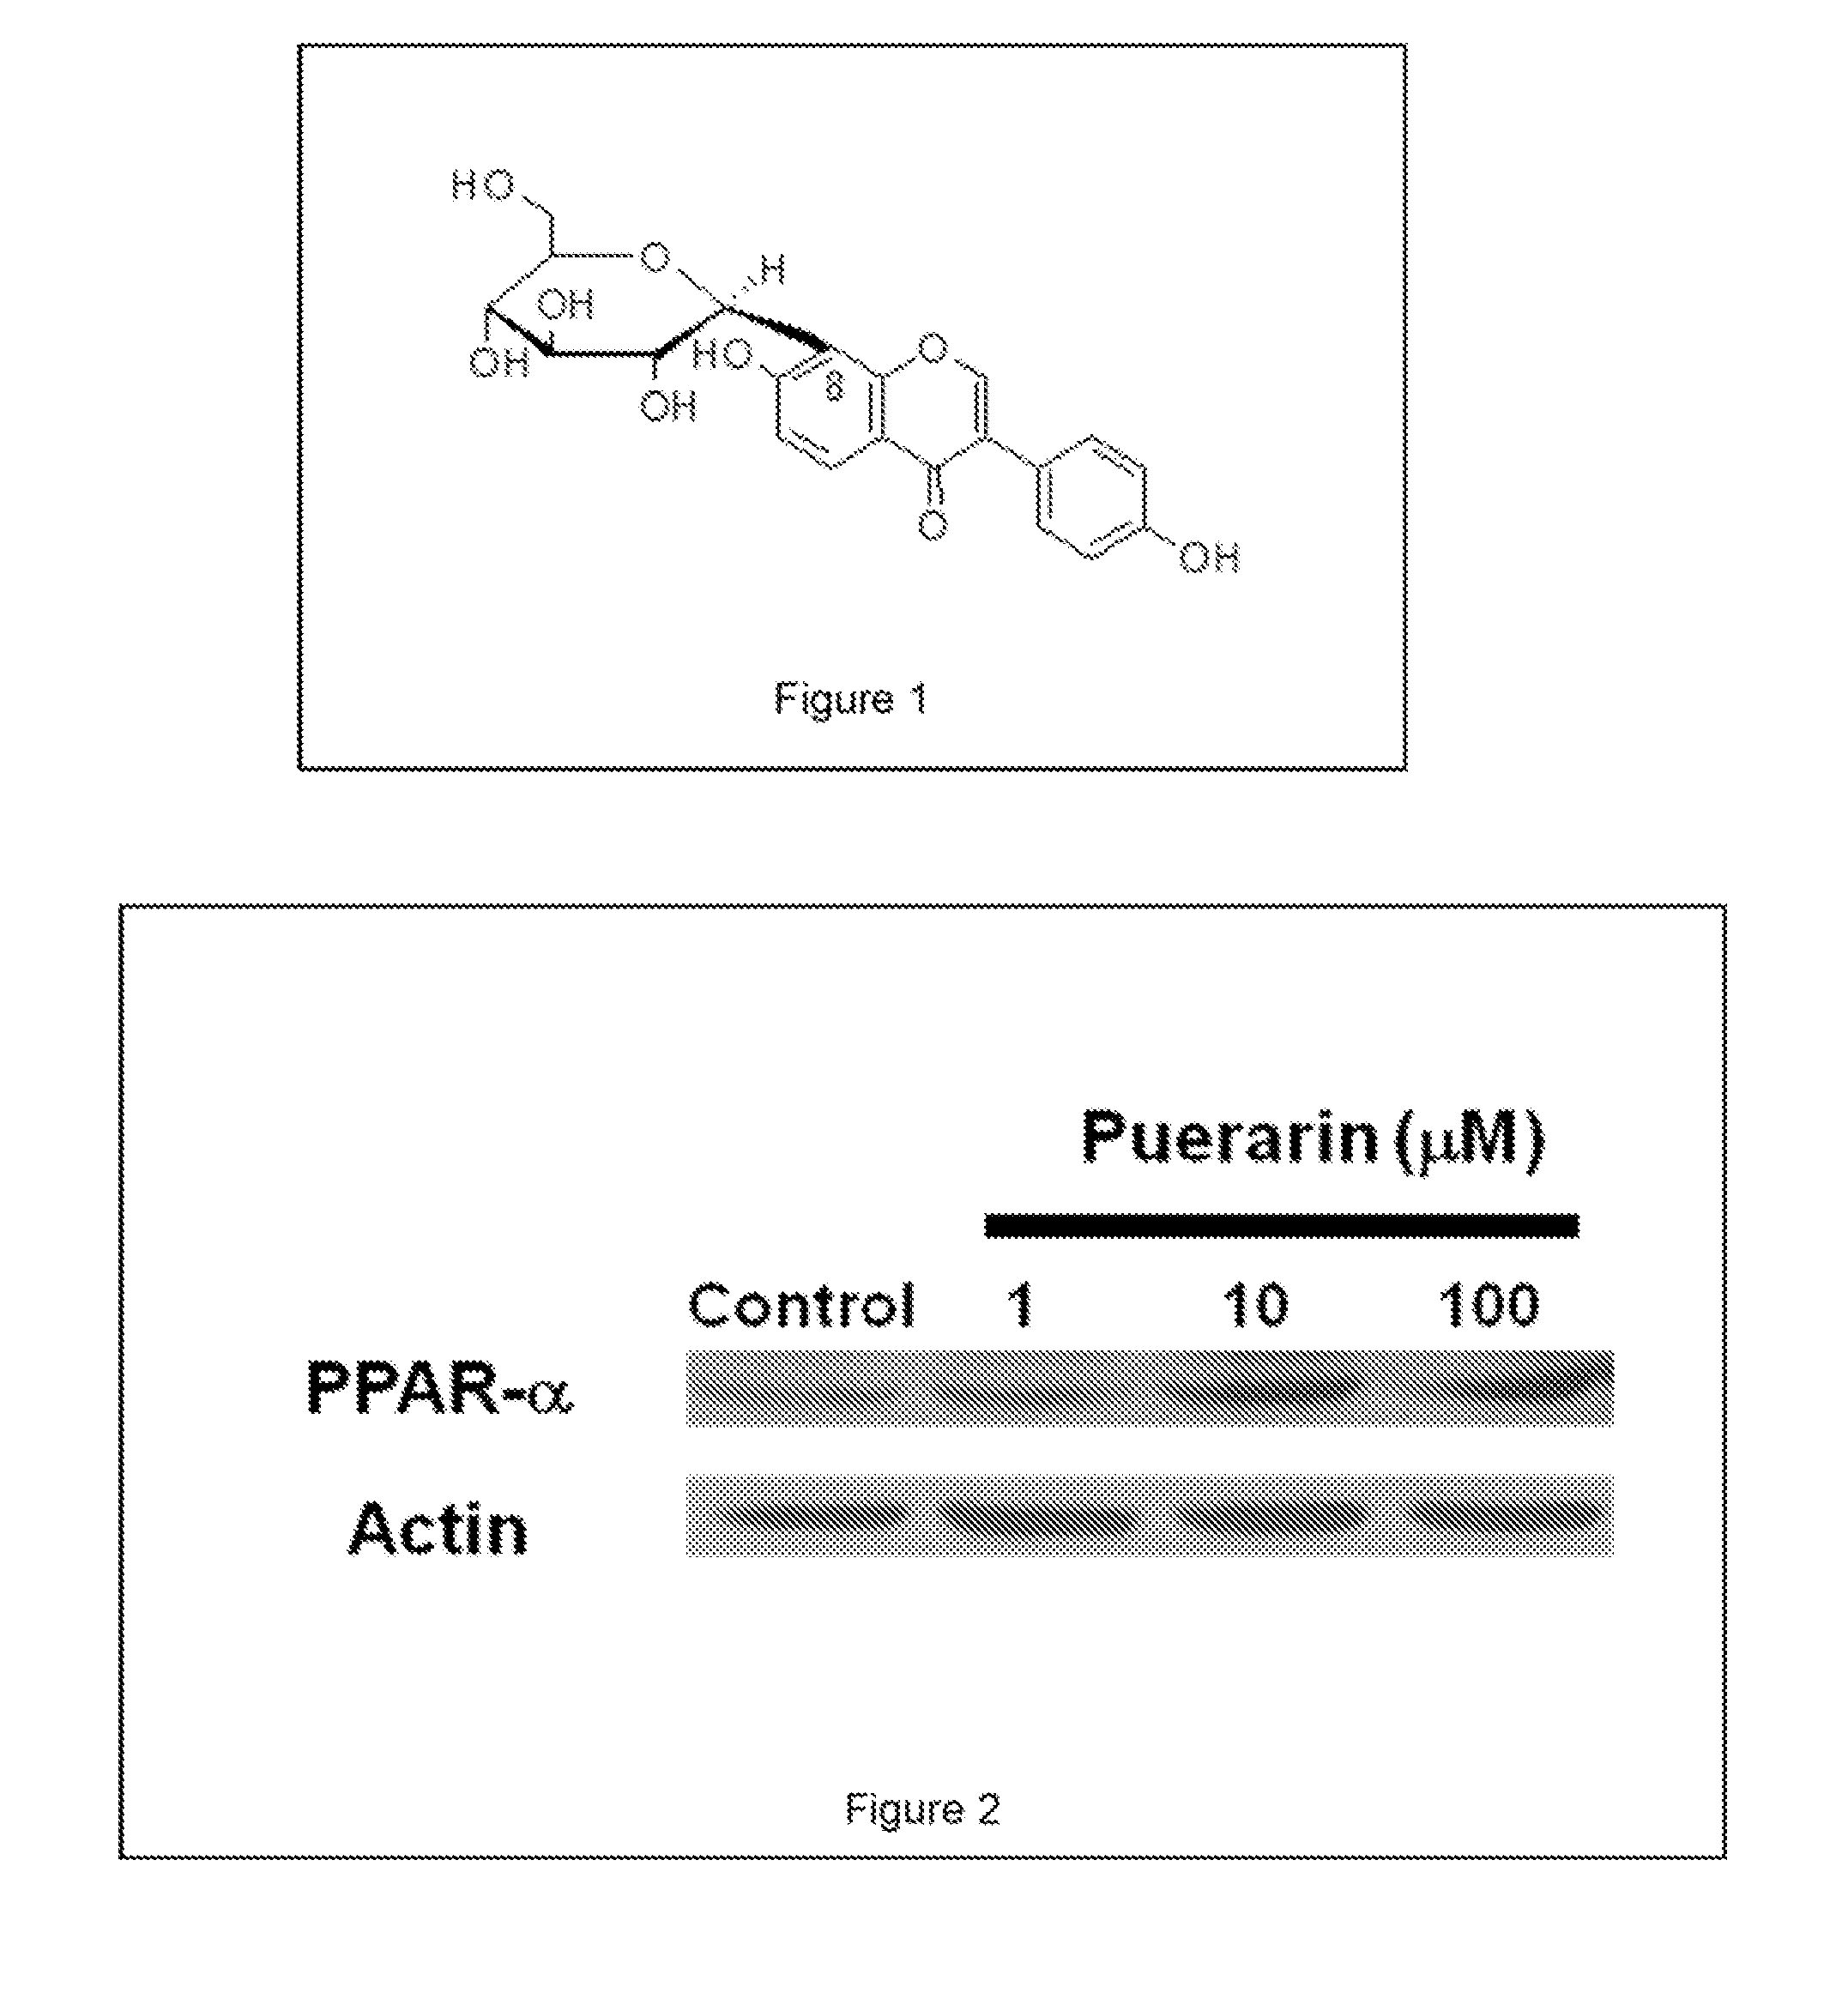 Isoflavone Glycosides as Peroxisome Proliferator-Activated Receptor-alpha Modulator